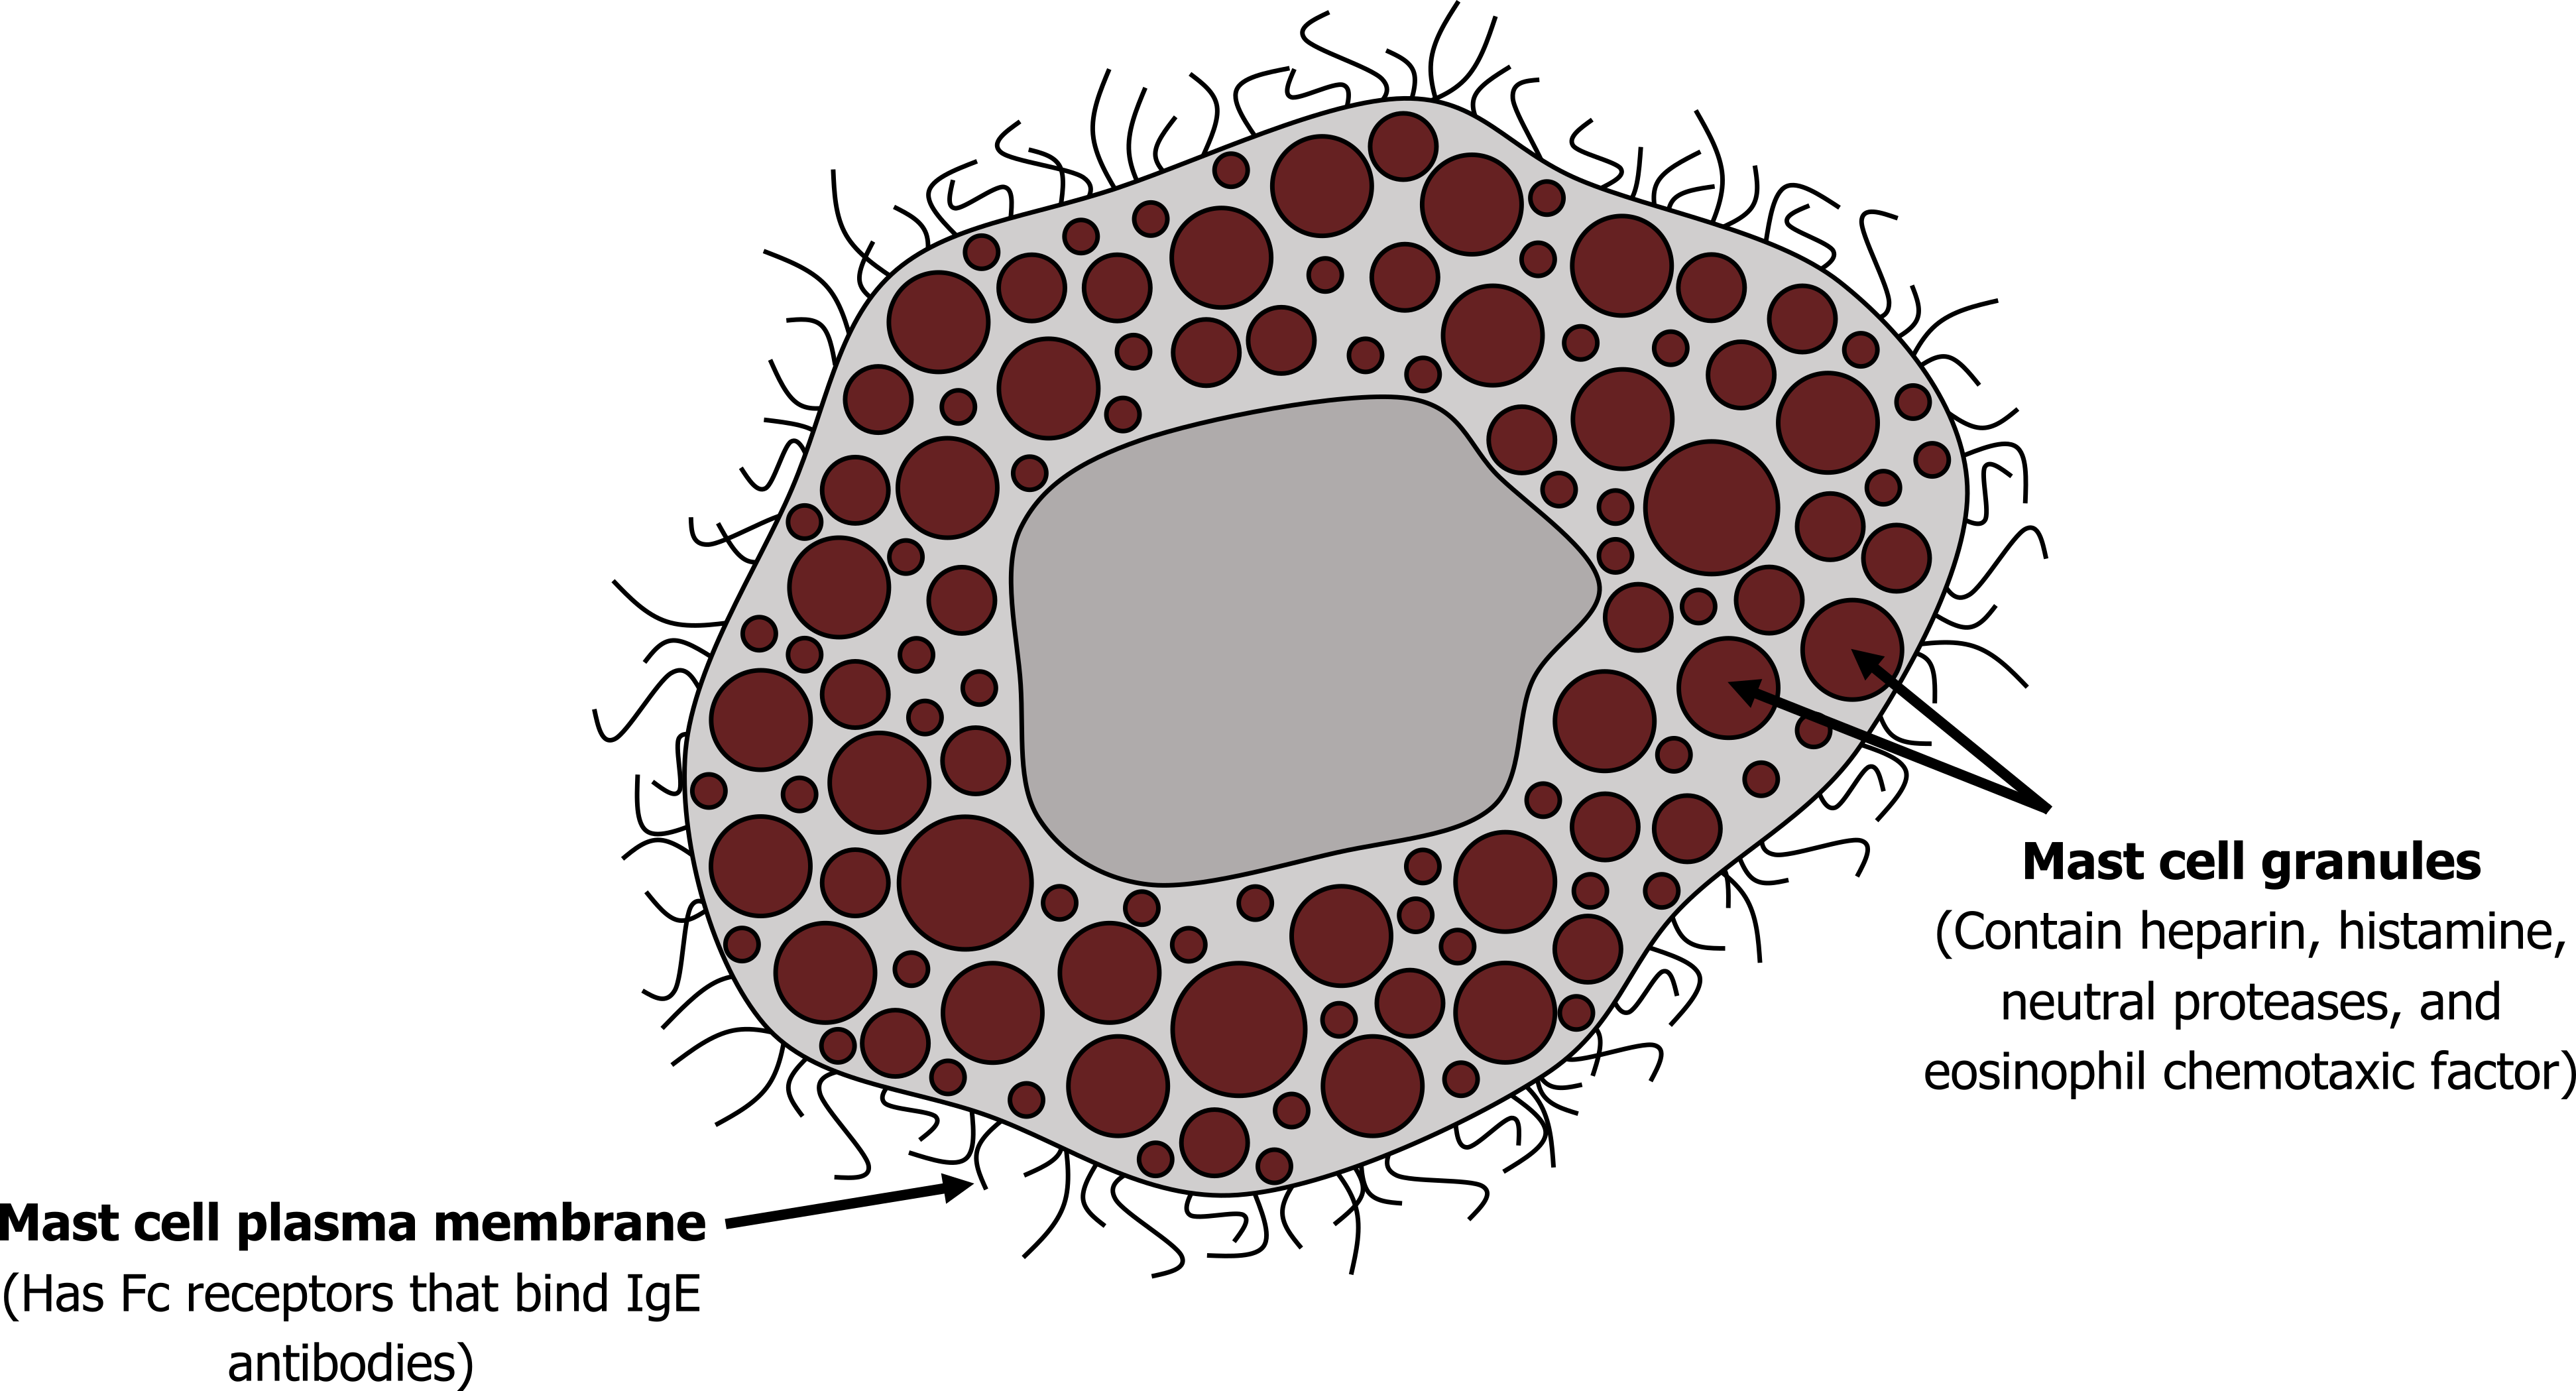 Mast cell depicted as a circle with many lines on the outside. The inside has many smaller red circles of various sizes and in the center is a plain gray circle. Text pointing to lines: Mast cell plasma membrane (Has Fc receptors that bind IgE antibodies). Text pointing to red circles: Mast cell granules (Contain heparin, histamine, neutral proteases, and eosinophil chemotactic factor)